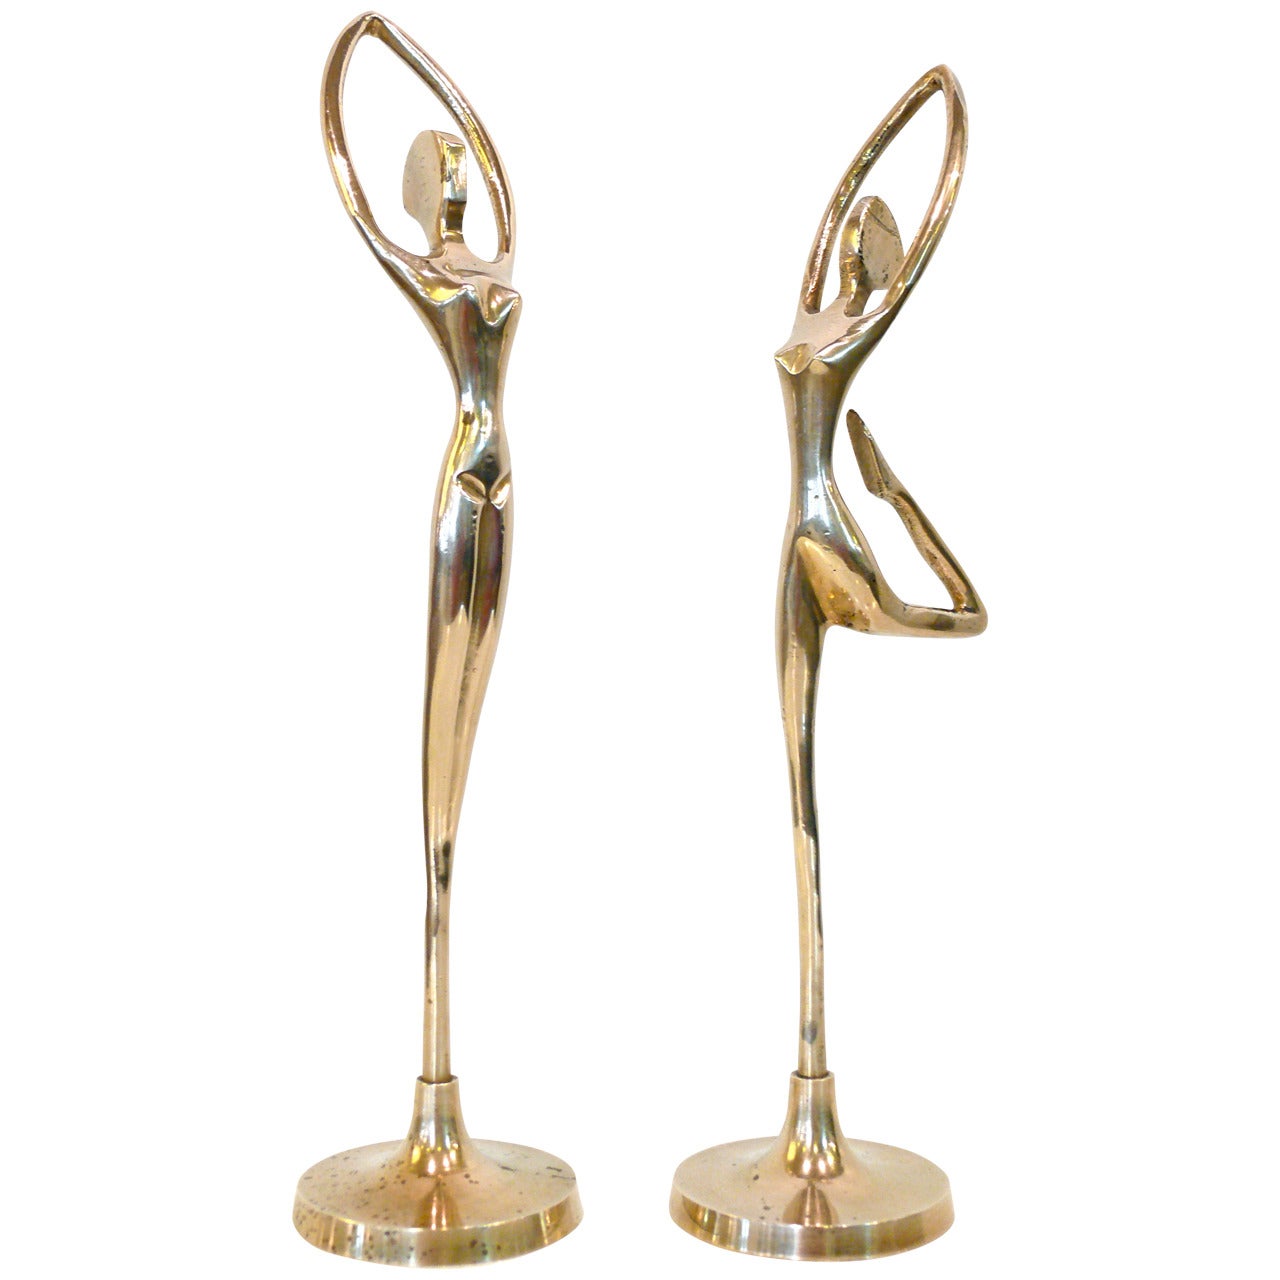 Pair of Small Mid-Century Polished Brass Sculptural Dancers